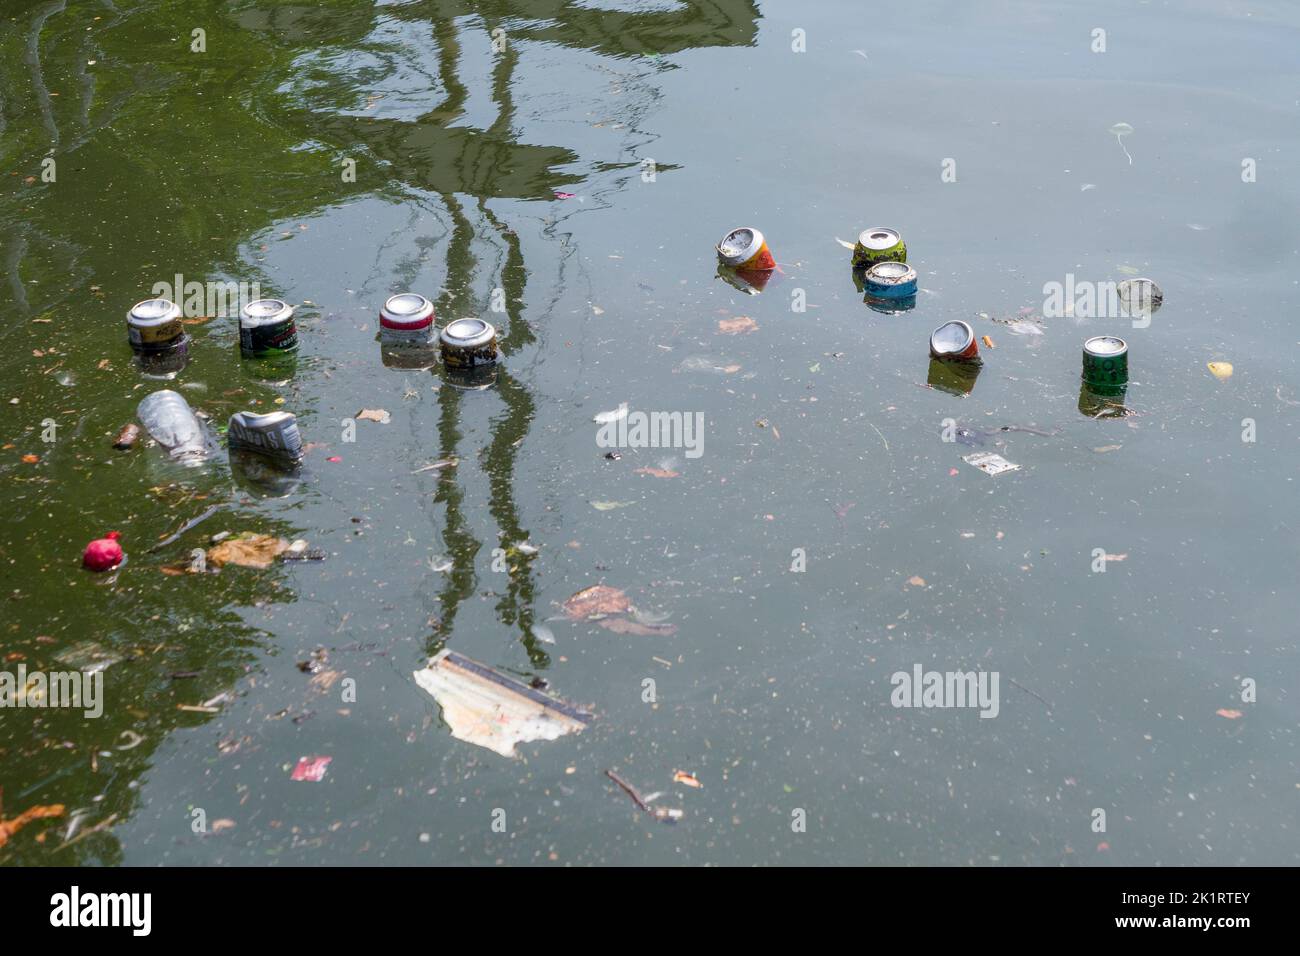 Litter floating in the water at Bristol Harbour in the City of Bristol, England. Stock Photo